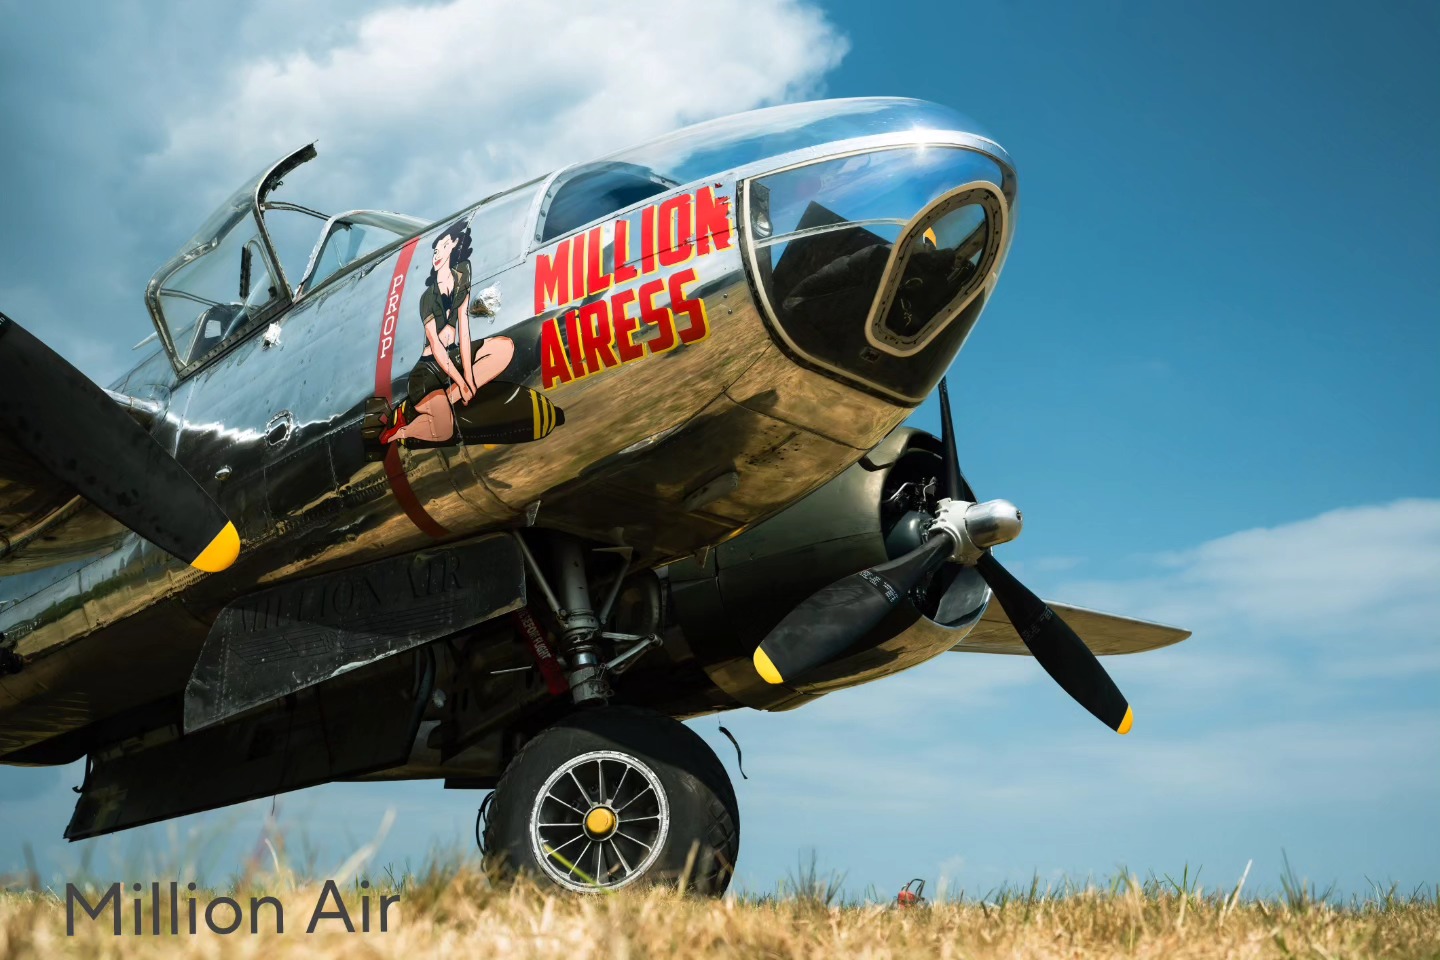 Million Air Sponsor Invader "Million Airess" to Normandy